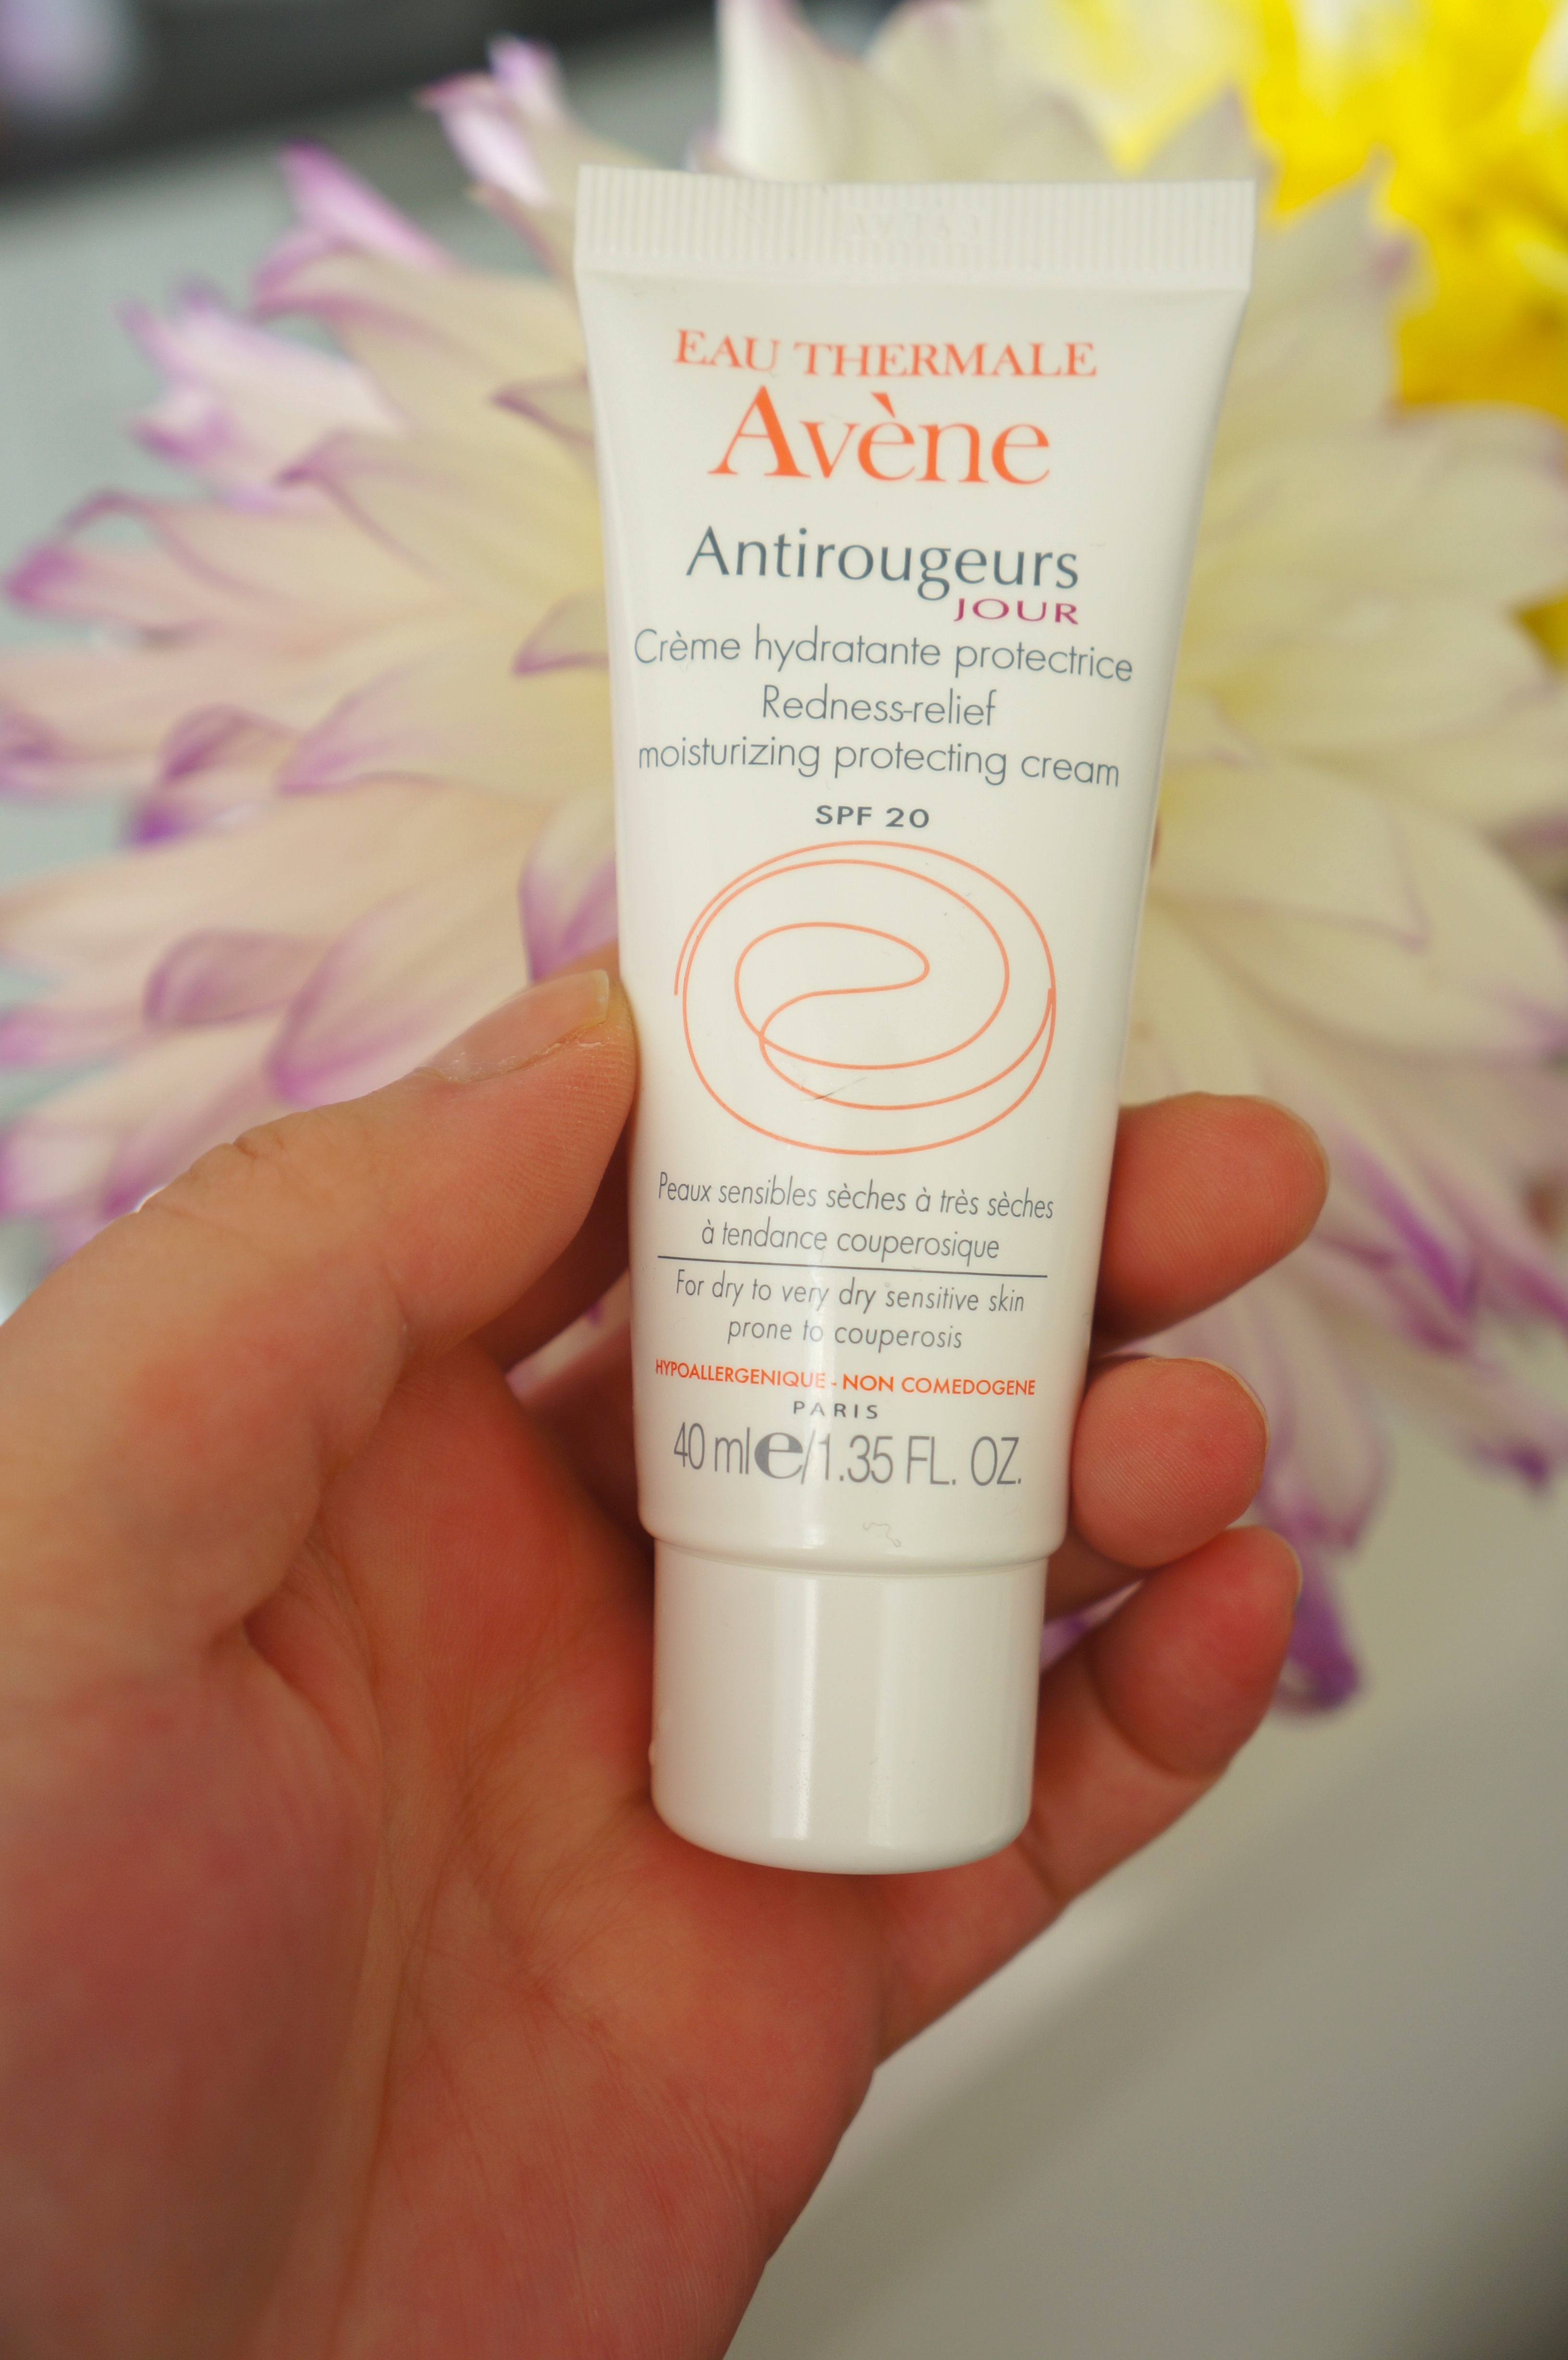 Avène Anti-Rougeurs Jour Crème protectrice et hydratante SPF 20/ Pic by kiwikoo.